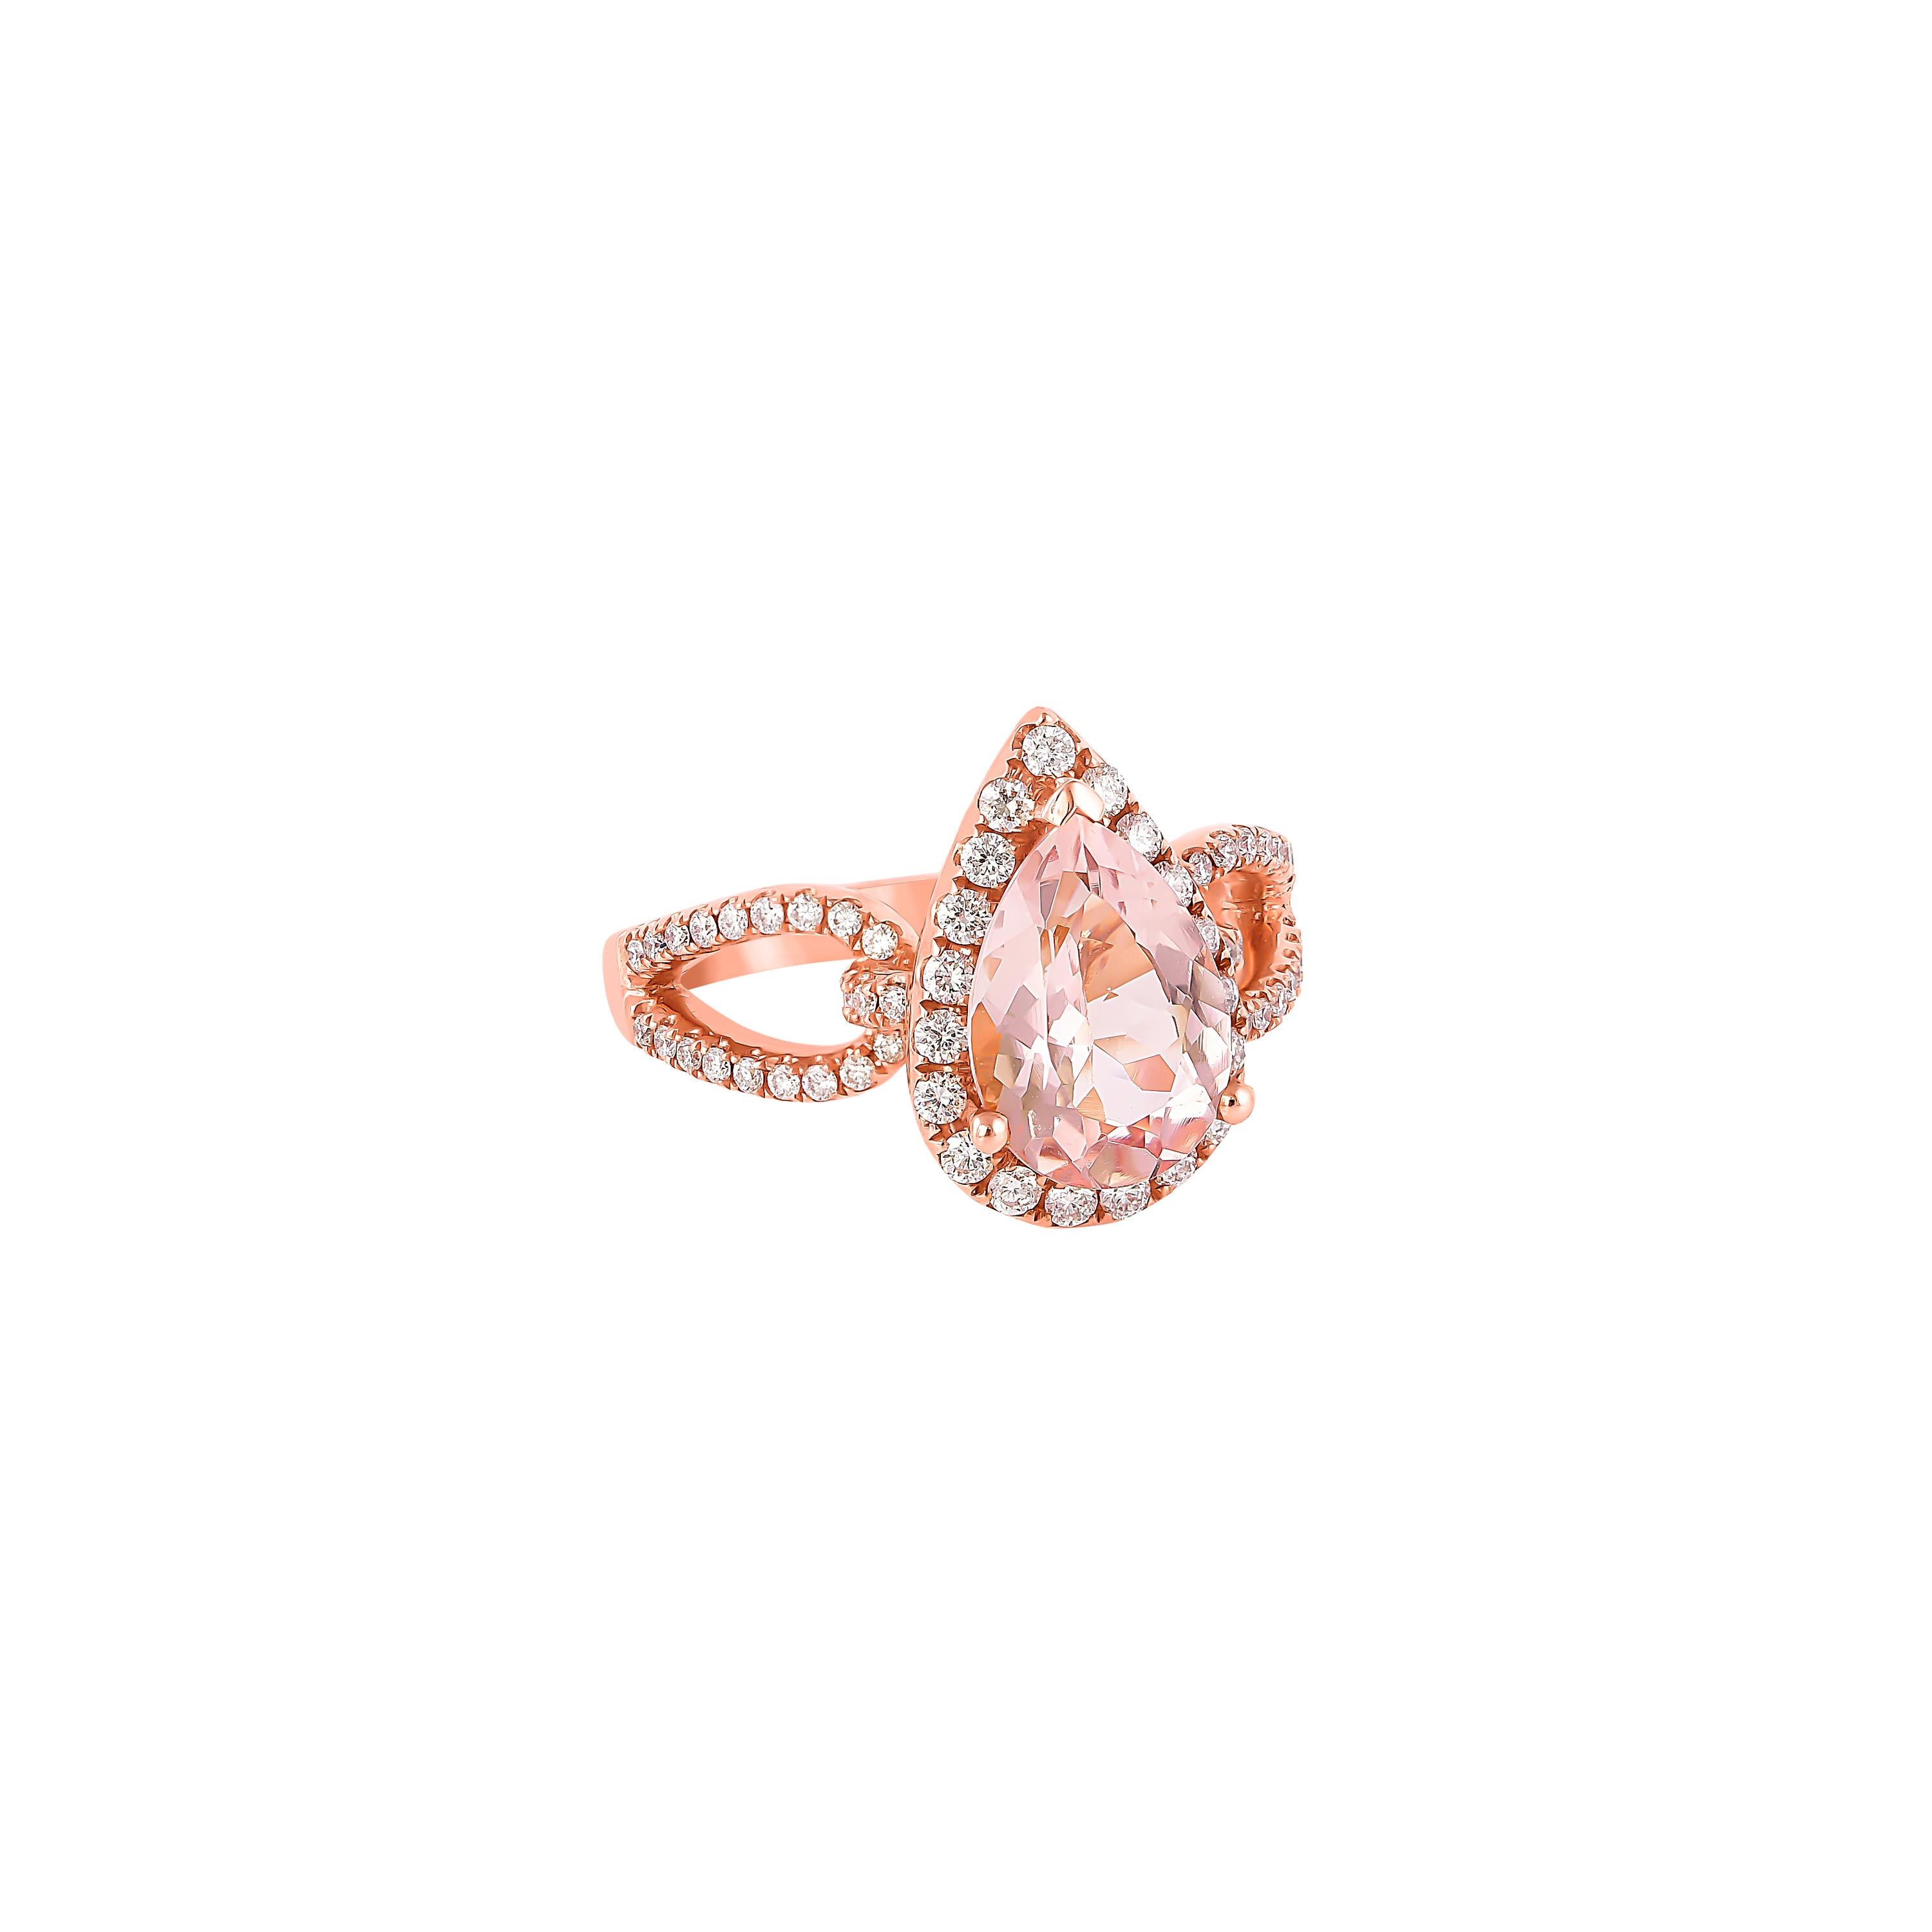 This collection features an array of magnificent morganites! Accented with diamonds these rings are made in rose gold and present a classic yet elegant look. 

Classic morganite ring in 18K rose gold with diamonds. 

Morganite: 2.37 carat pear